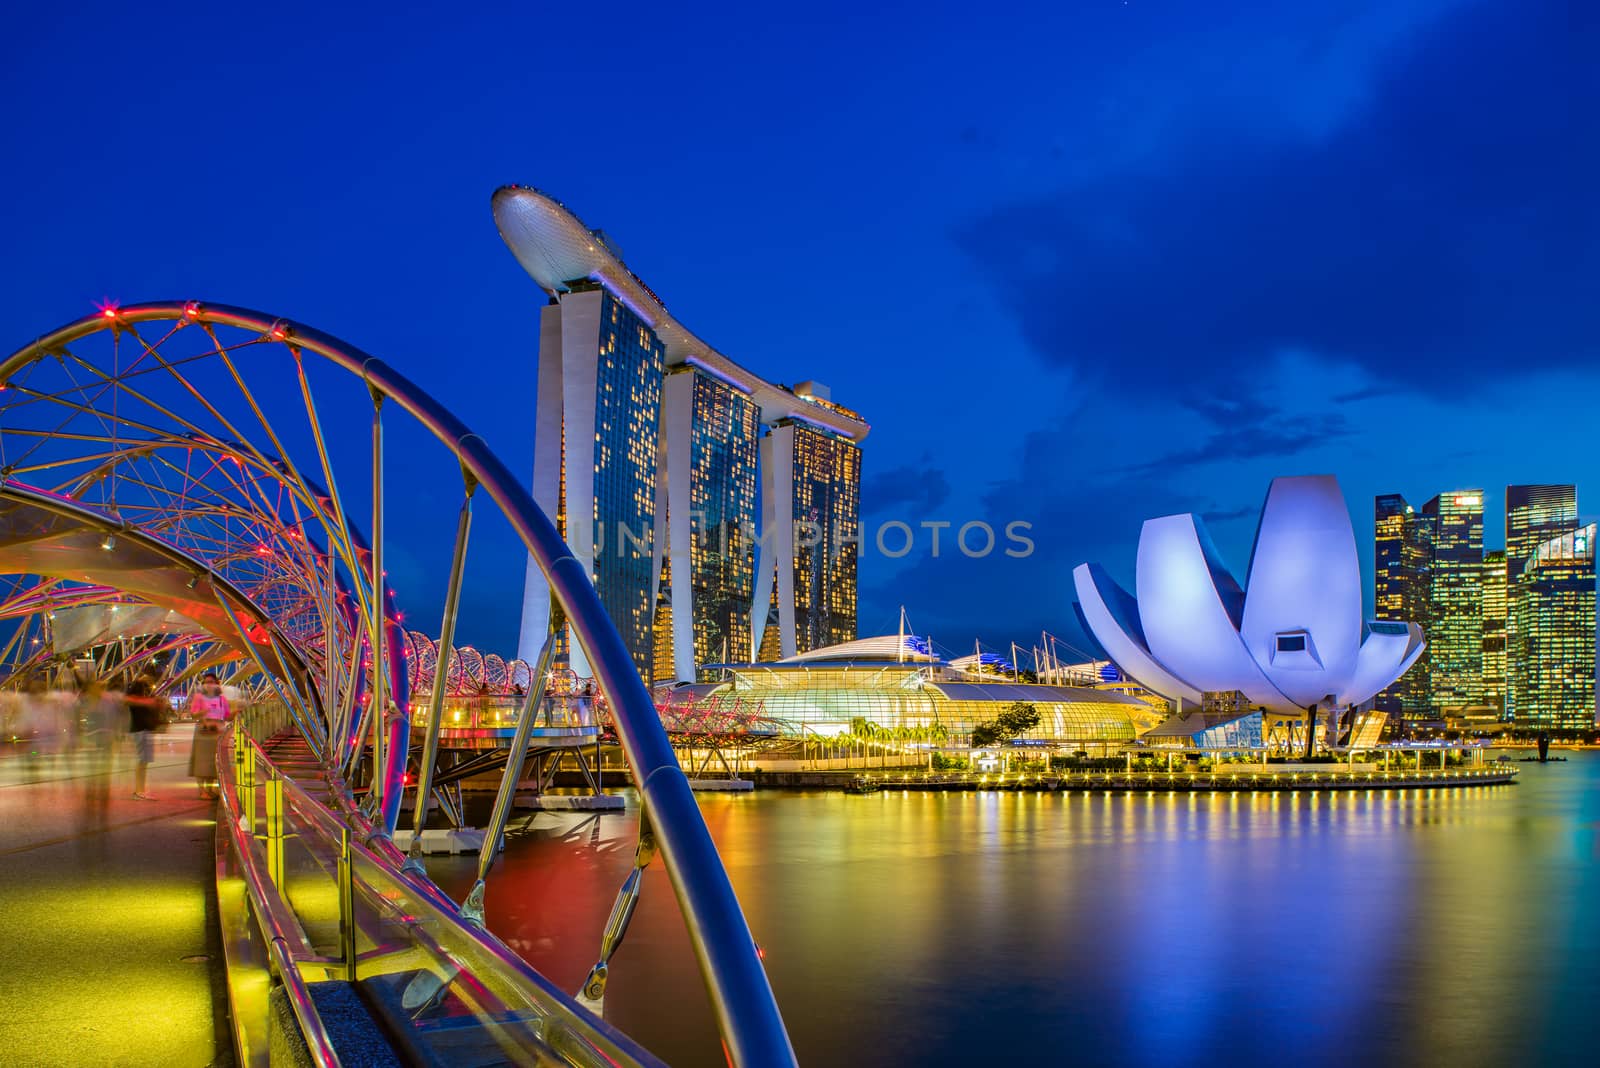 SINGAPORE CITY, SINGAPORE - MARCH 9, 2019: Marina Bay Sands at night the largest hotel in Asia. It opened on 27 April 2010. Singapore on April 19, 2018